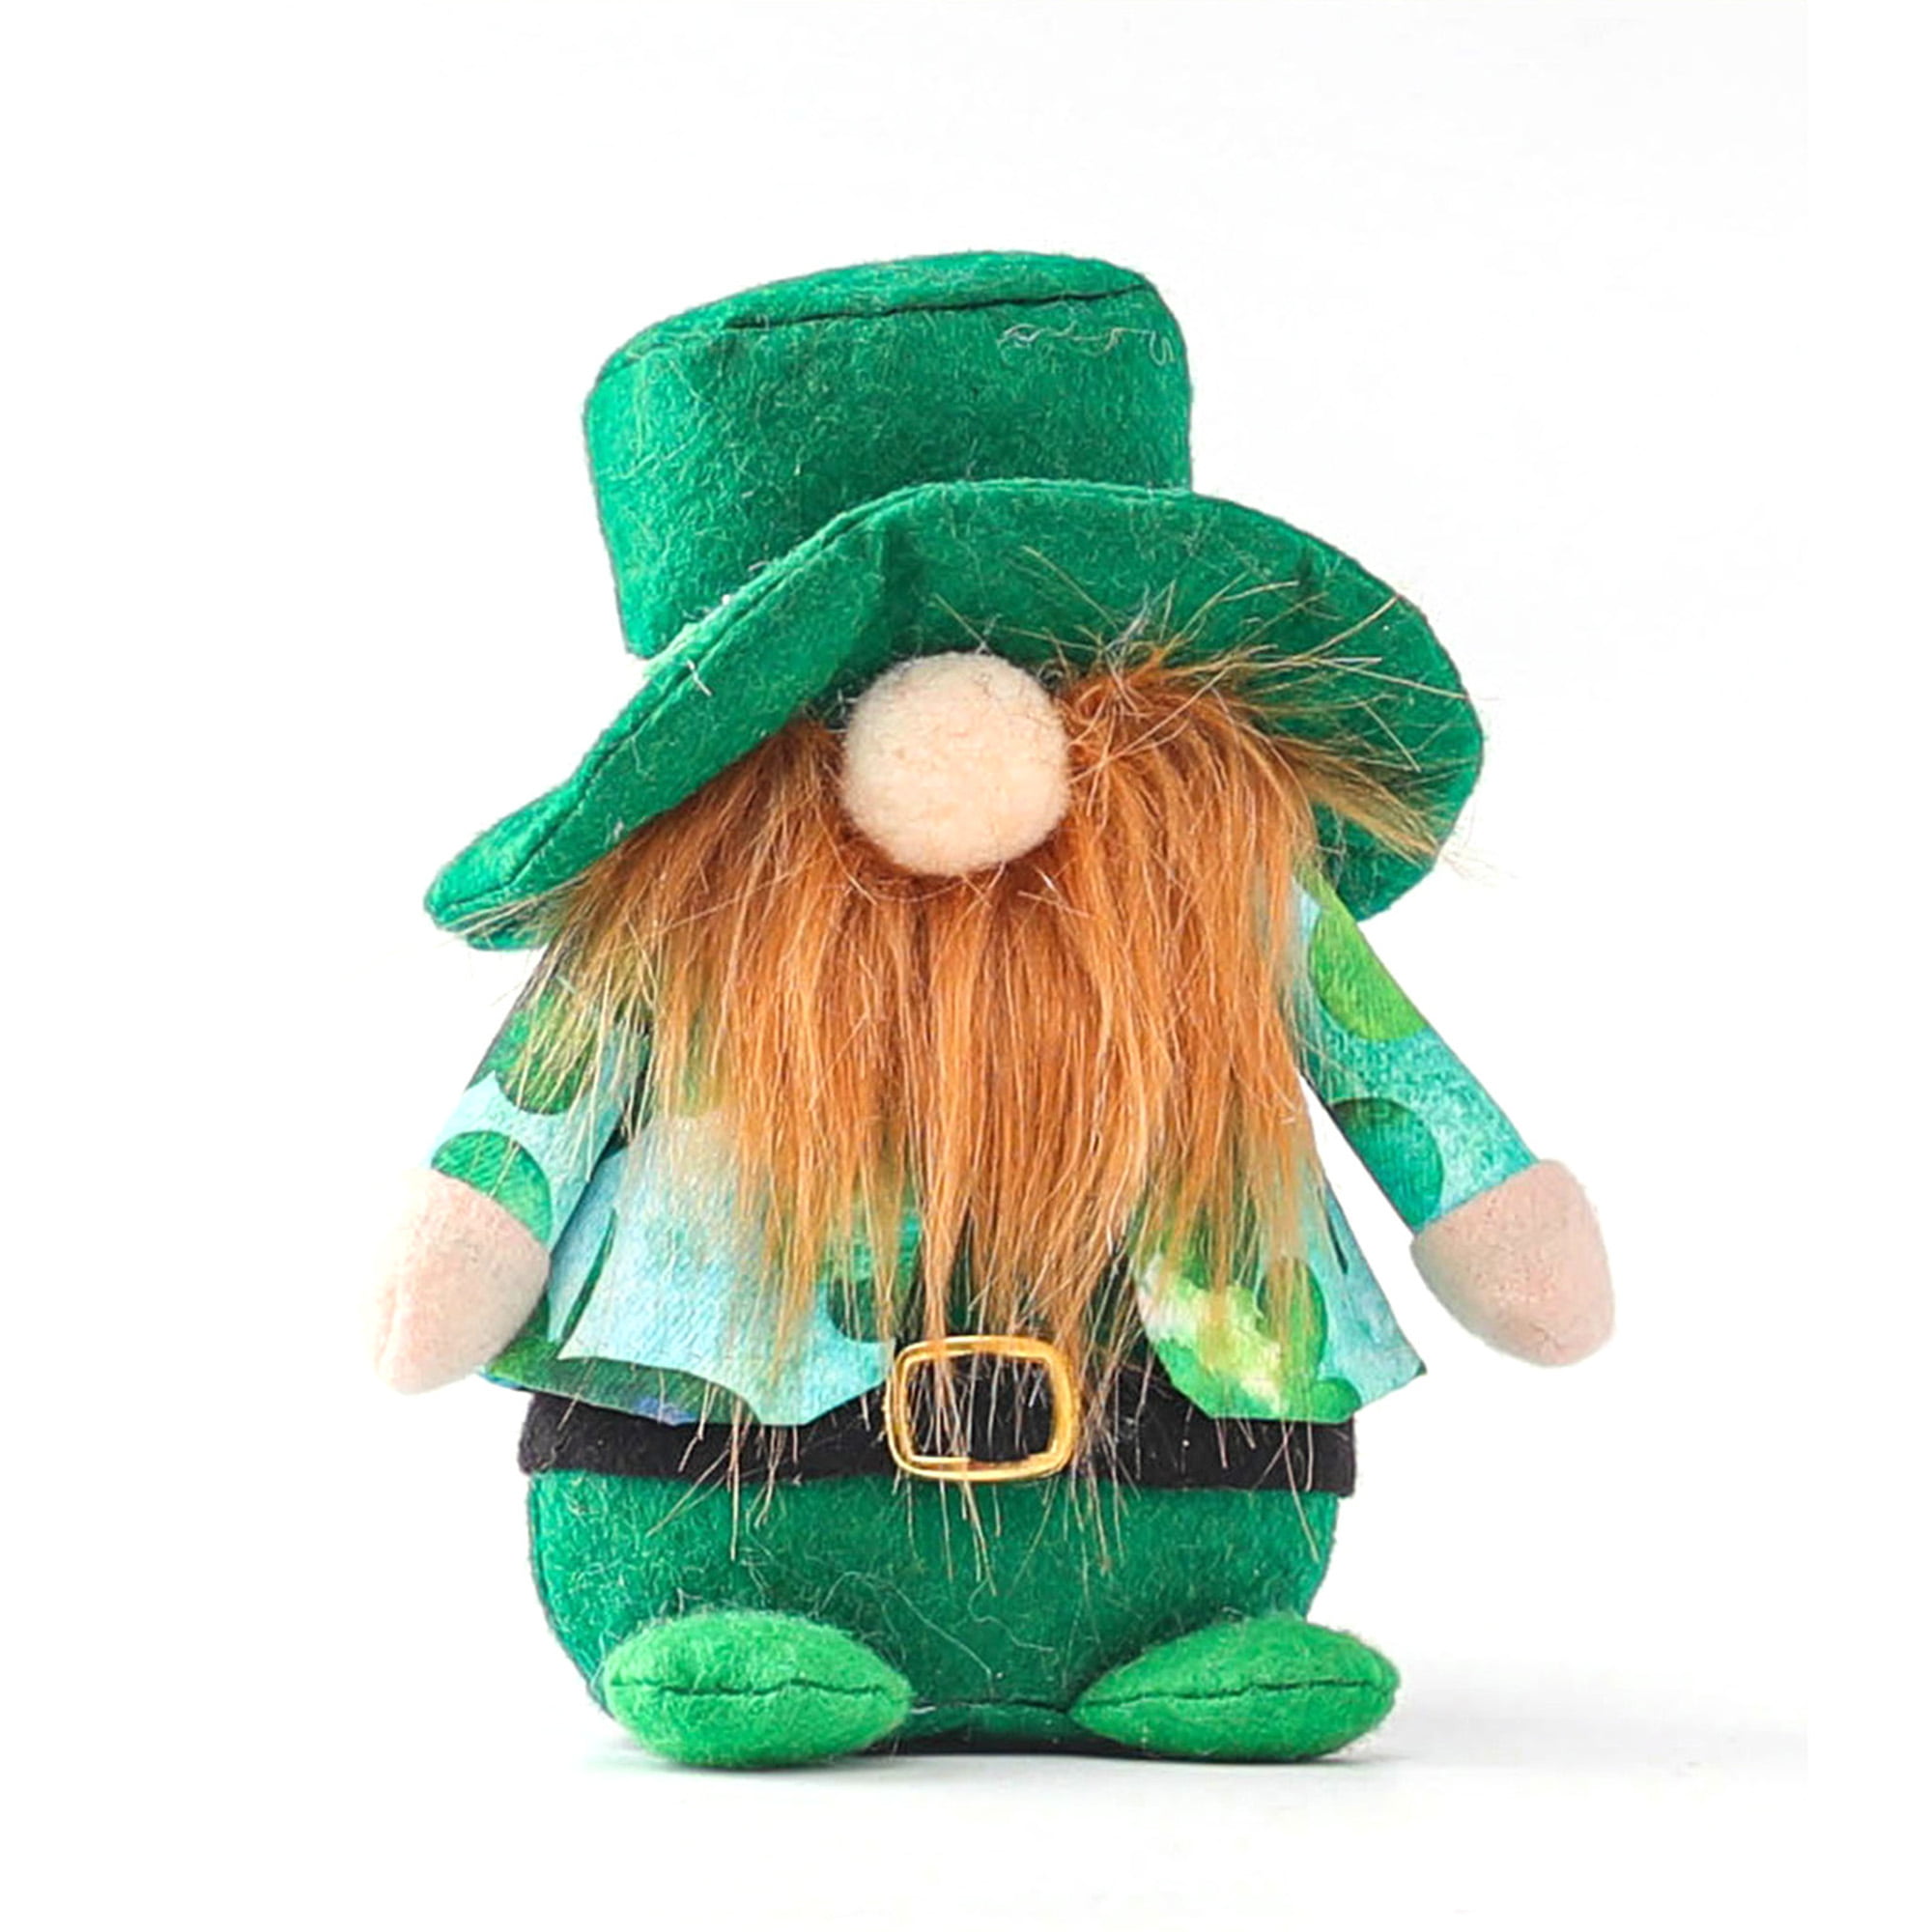 Patrick 's Day Decoration Gift Green Harapu 12'' Long Leg Soft Body Vinyl Face Plush Dolls Leprechaun Elf with Hat & Tag Ornaments for Holiday St 